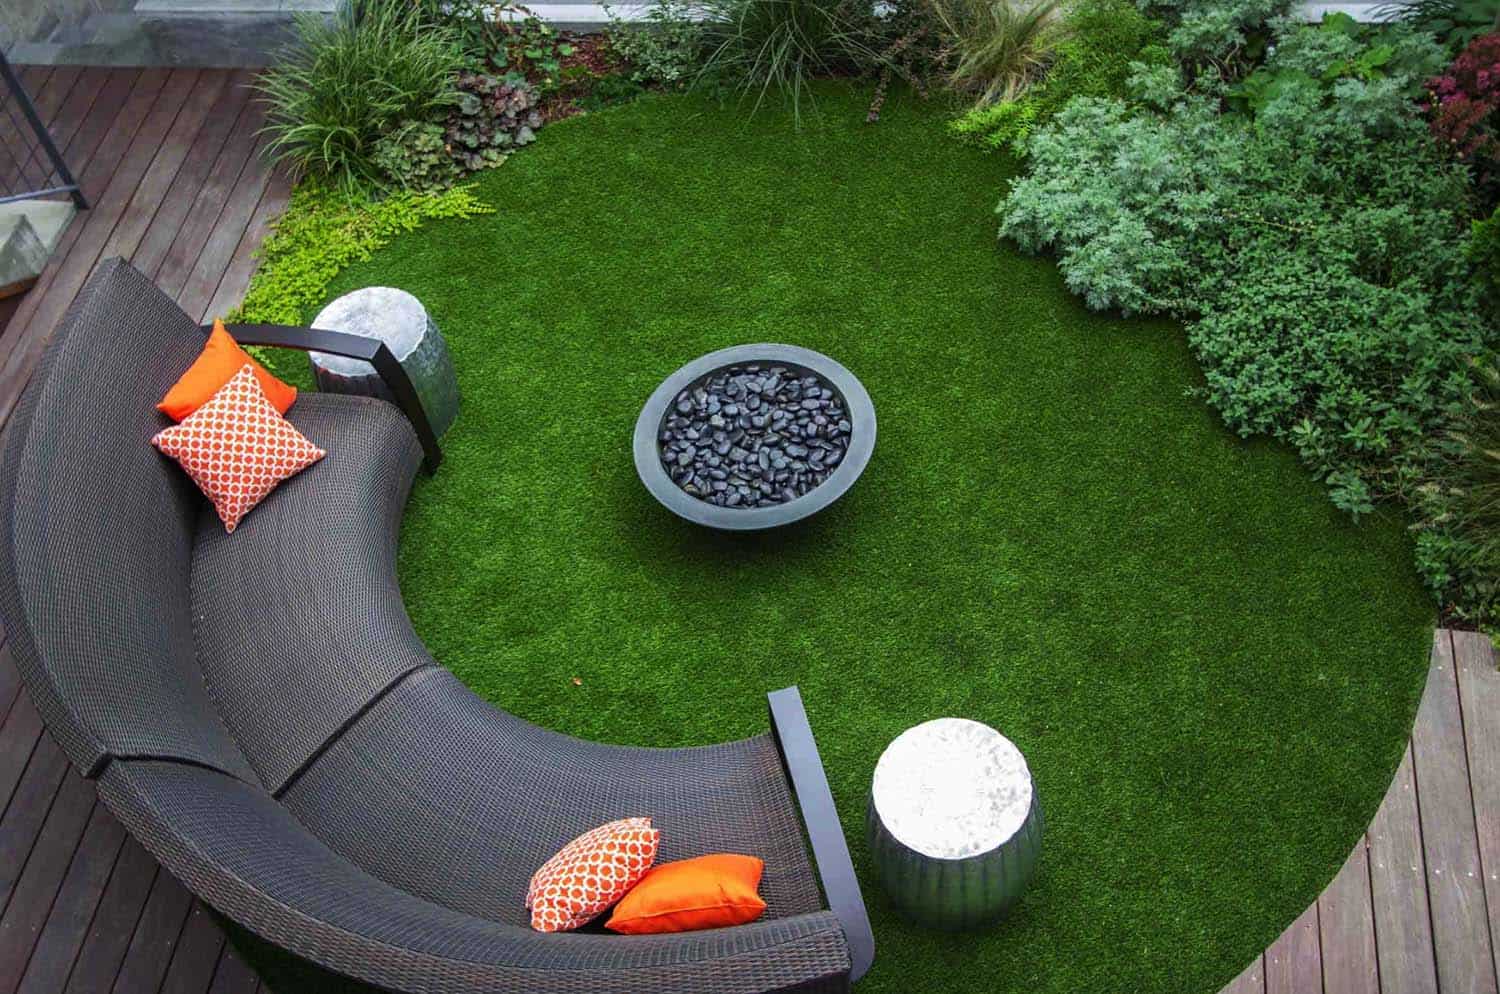 28 Inspiring Fire Pit Ideas To Create A, Can You Place Fire Pit On Grass